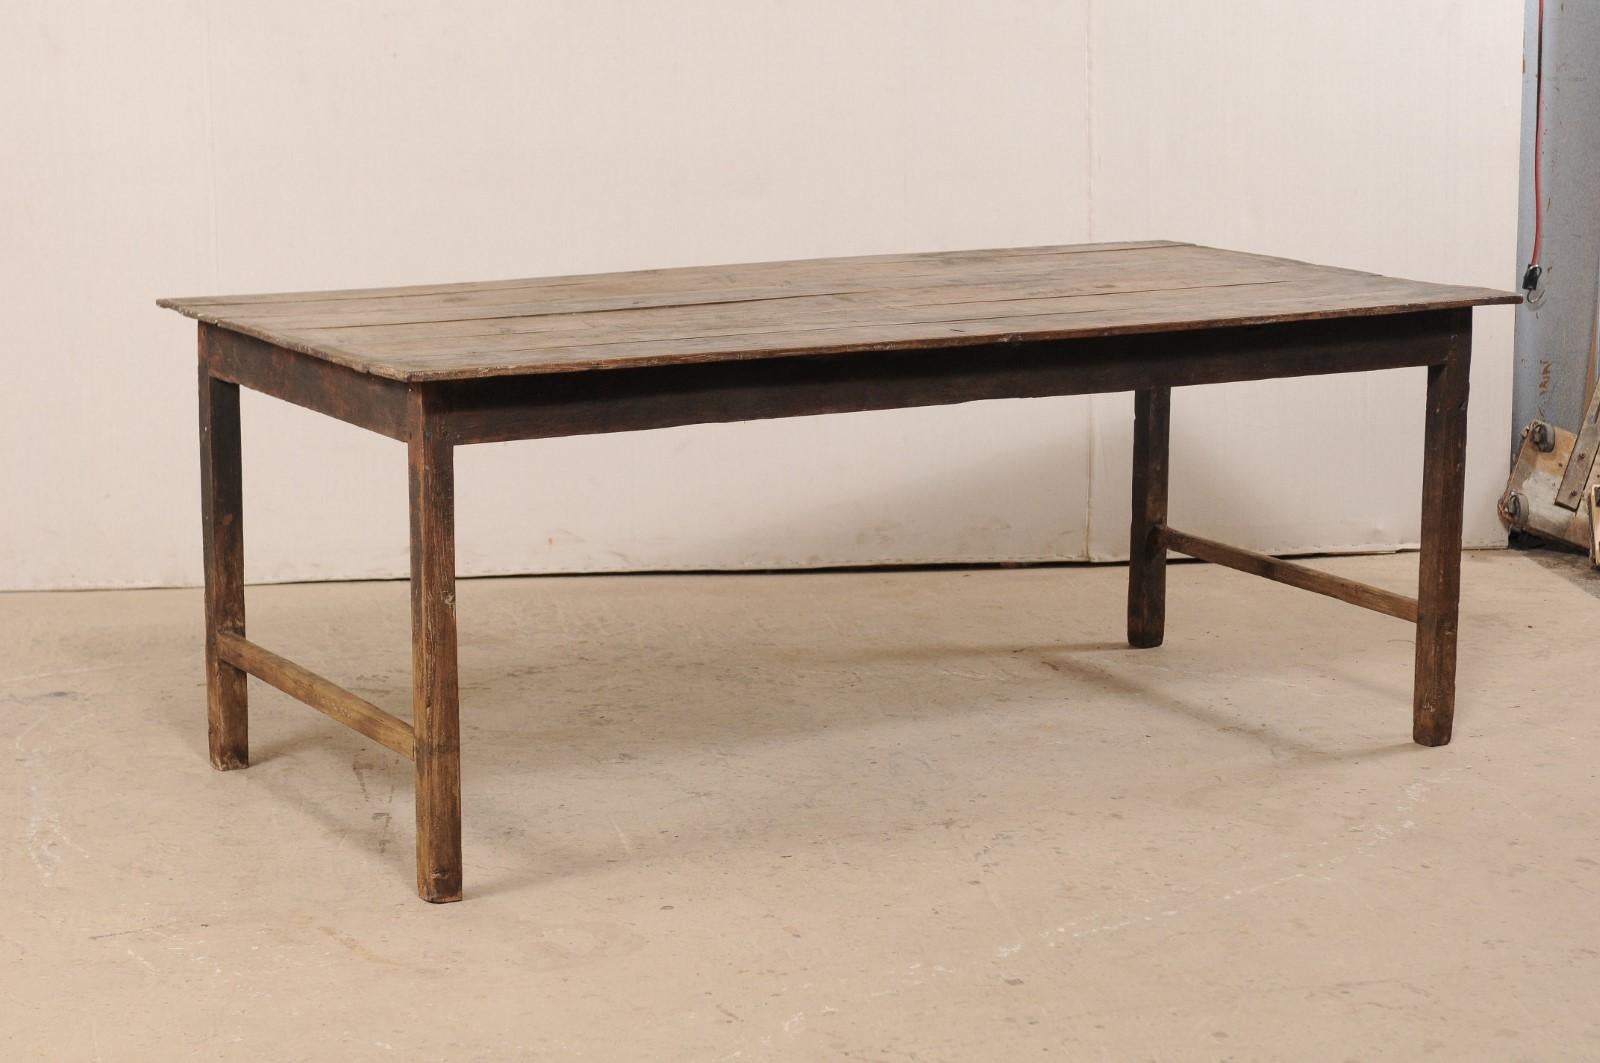 A Dutch Colonial teak wood table from the late 19th century. This antique table from Indonesia is approximately 6.5 feet in length and has a beautiful rustic appearance, designed with minimal adornment. This piece features a rectangular-shaped,